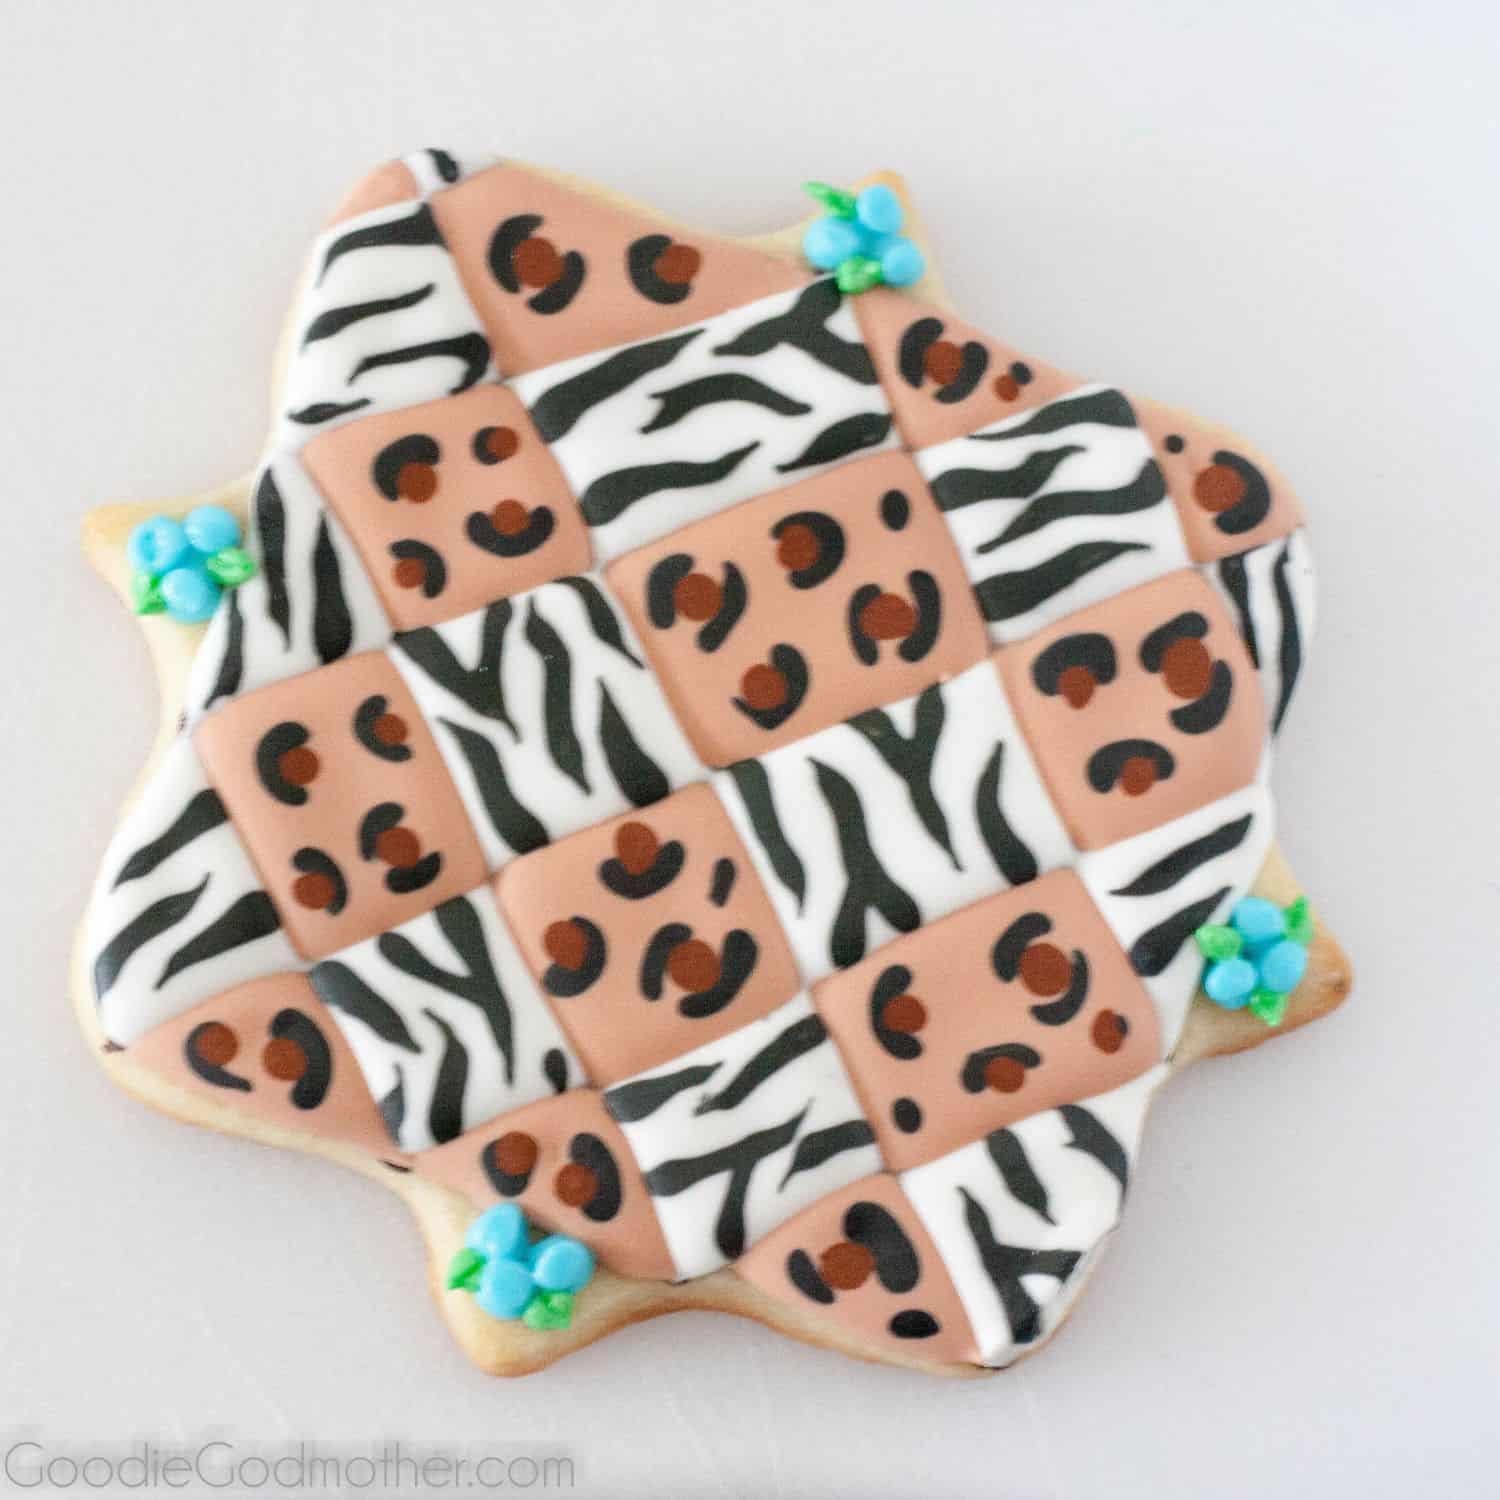 Learn to make stunning quilted animal print sugar cookies on GoodieGodmother.com